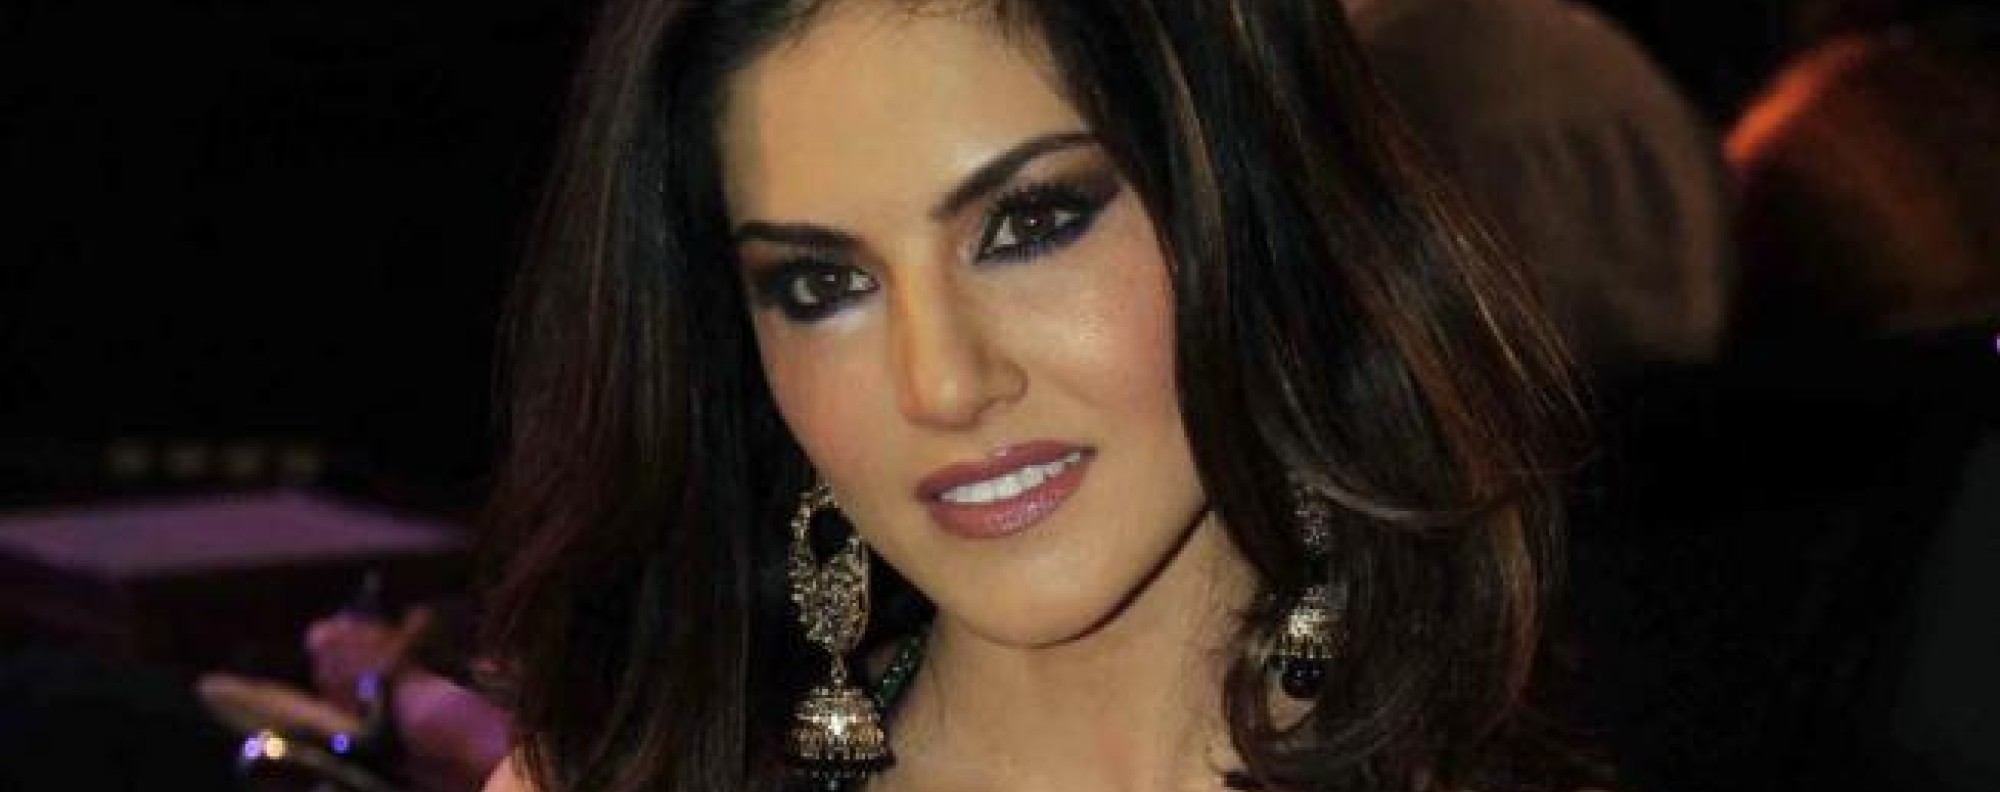 Sunny Leone Raping Sex Videos - Rape crisis in India leads to calls for porn star Sunny Leone to be jailed  | South China Morning Post